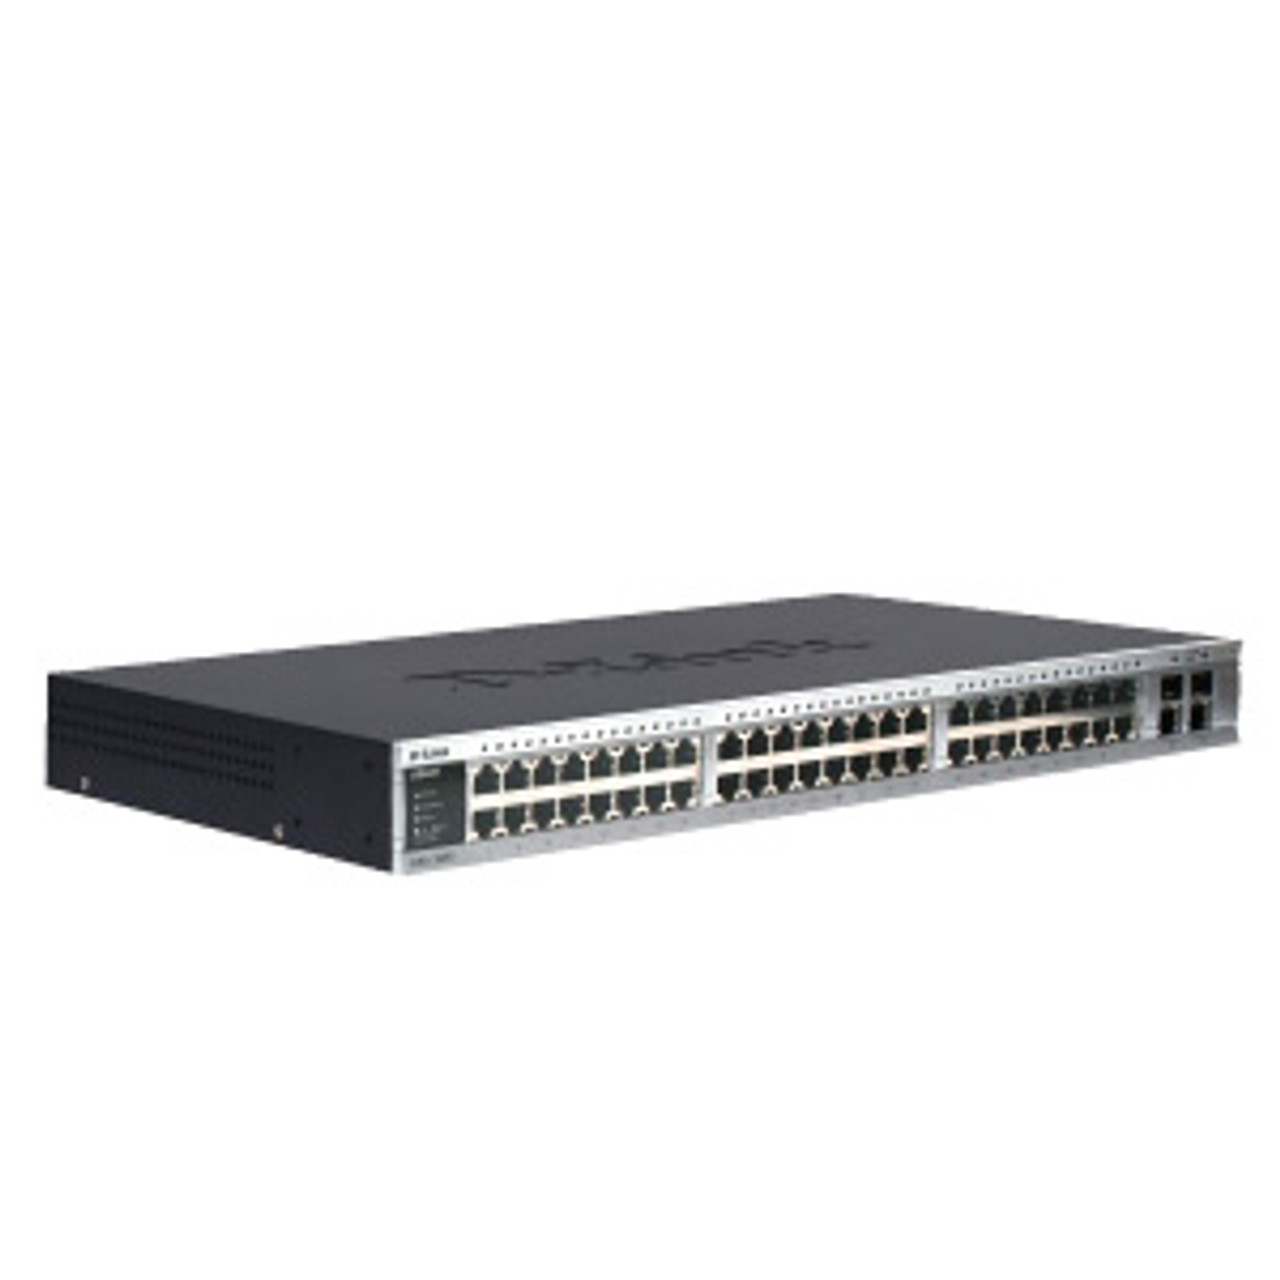 DES-3828-TAA D-Link xStack Managed 24-Ports 10/100 Stackable L3 Switch with 4 Gigabit Copper Ports + 2 Combo SFP (TAA Compliant) (Refurbished)